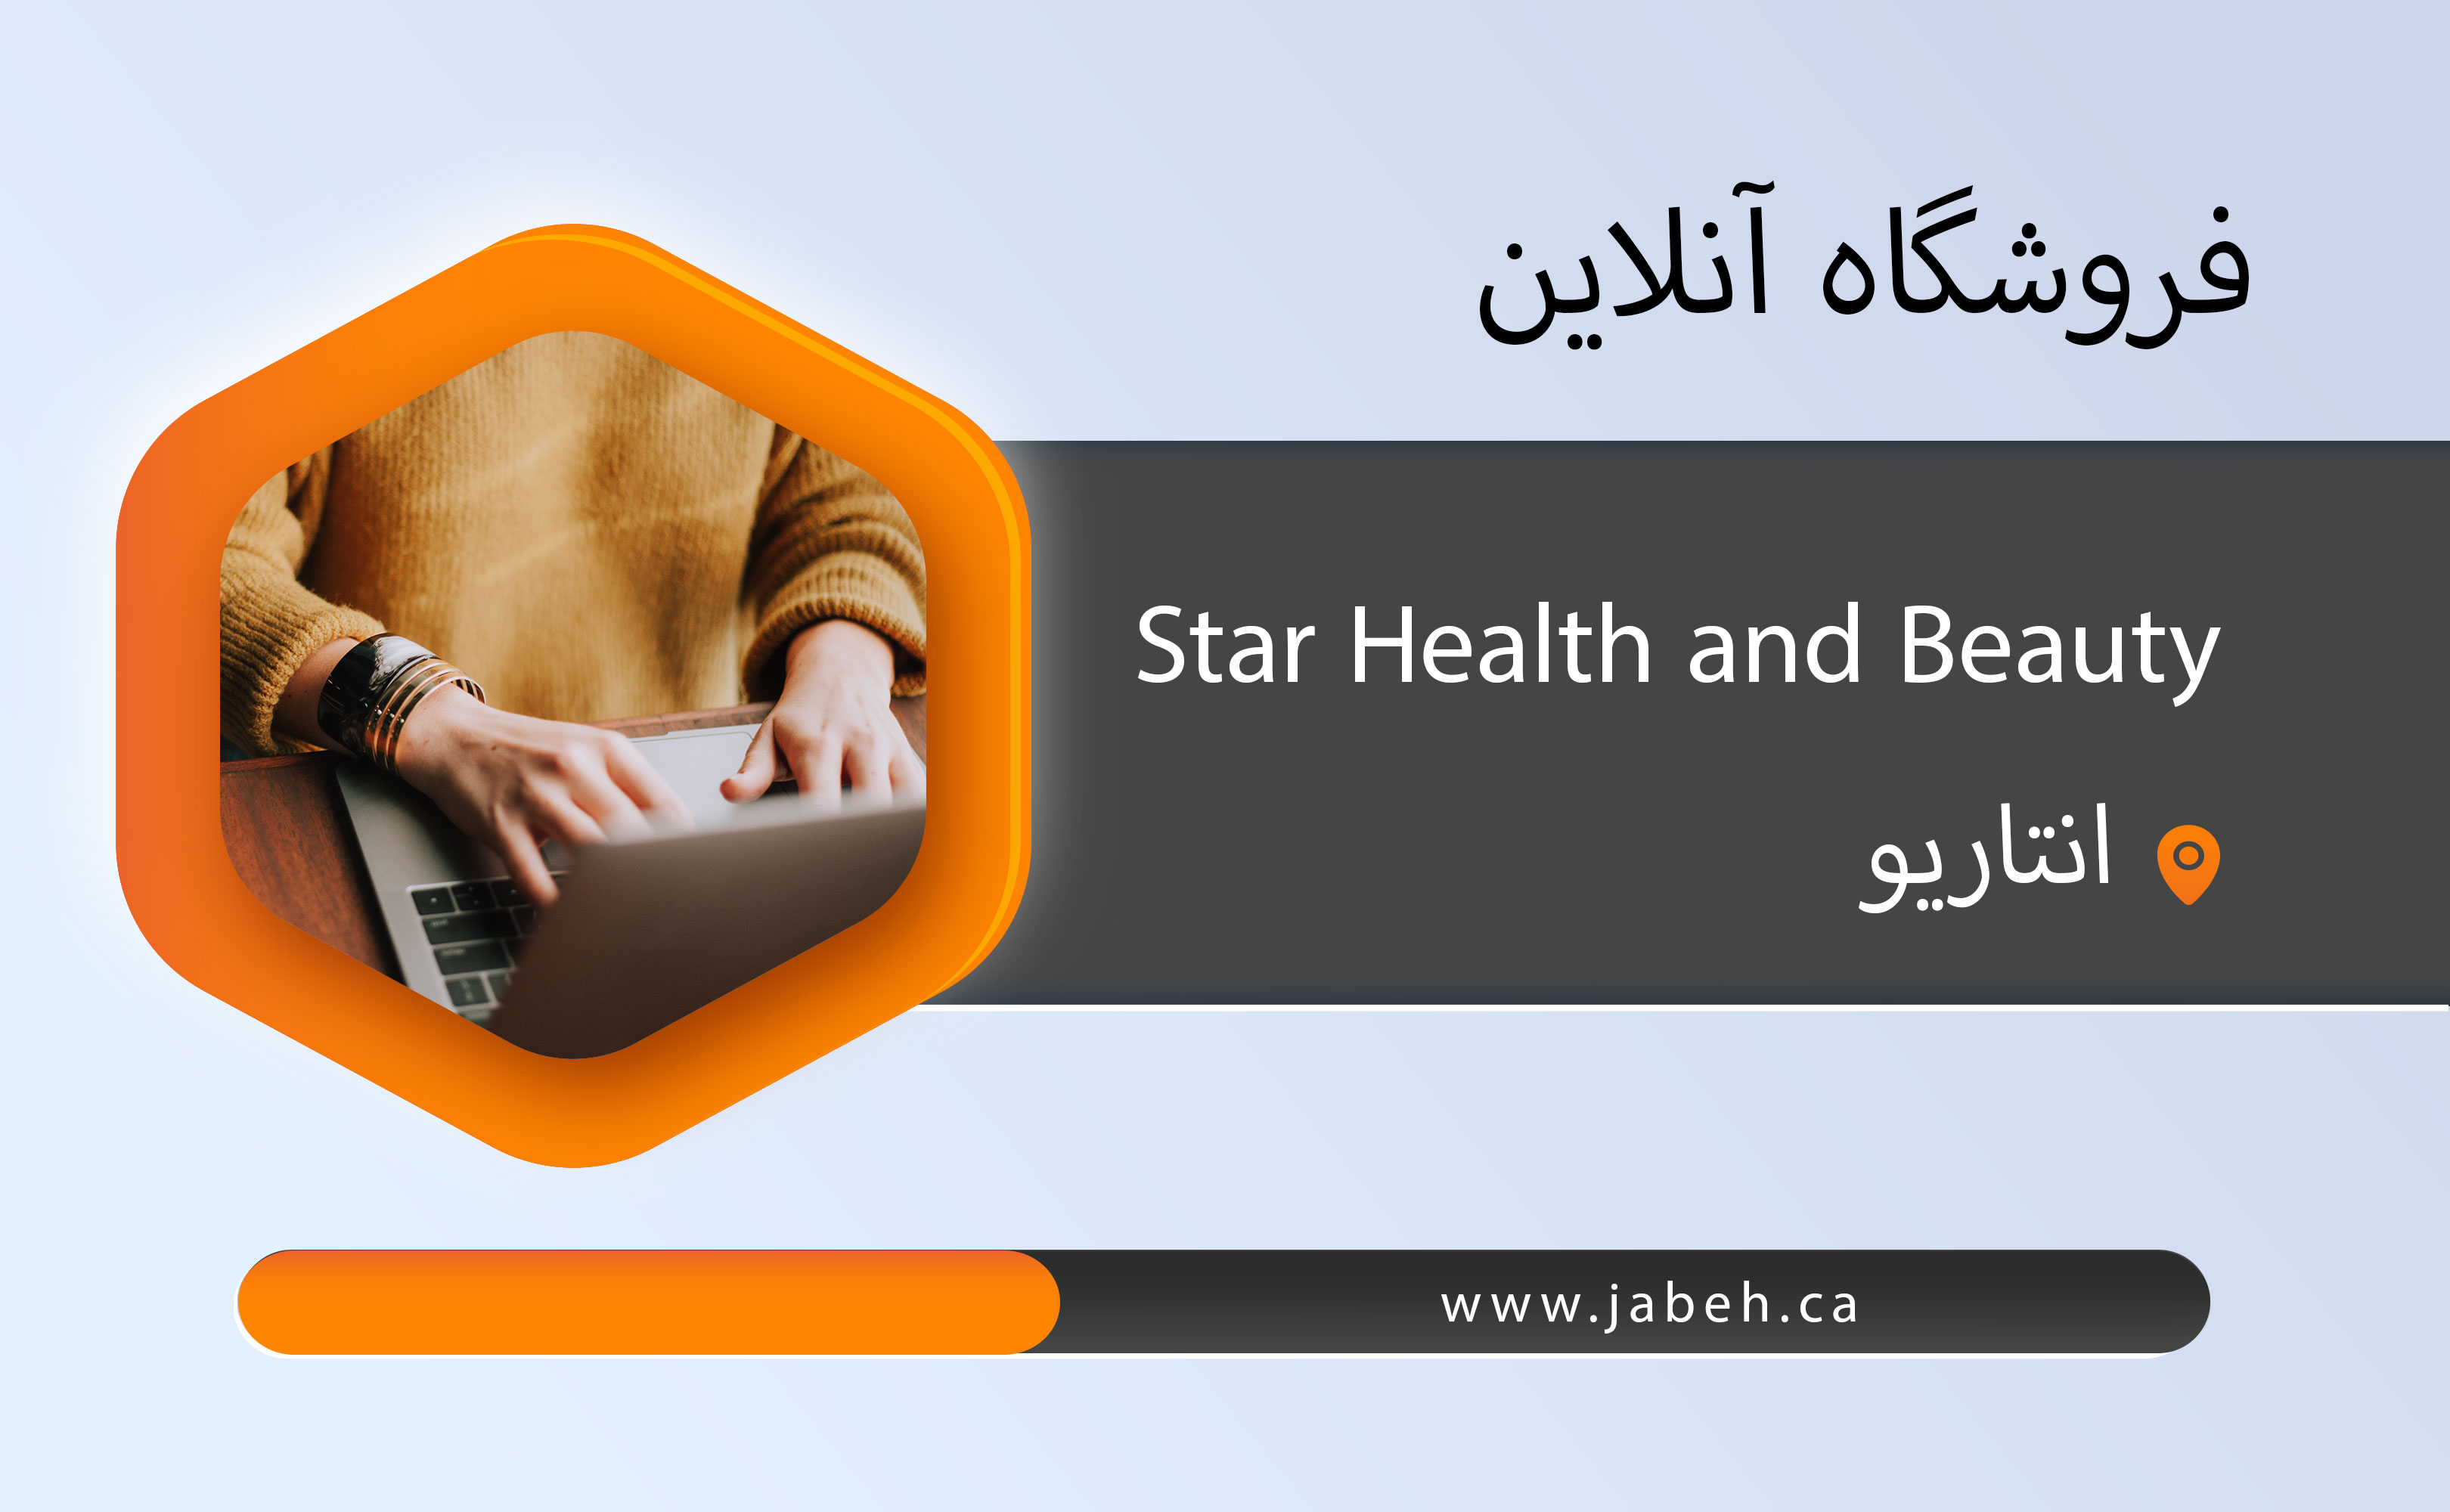 Star Health and Beauty Online Store in Ontario